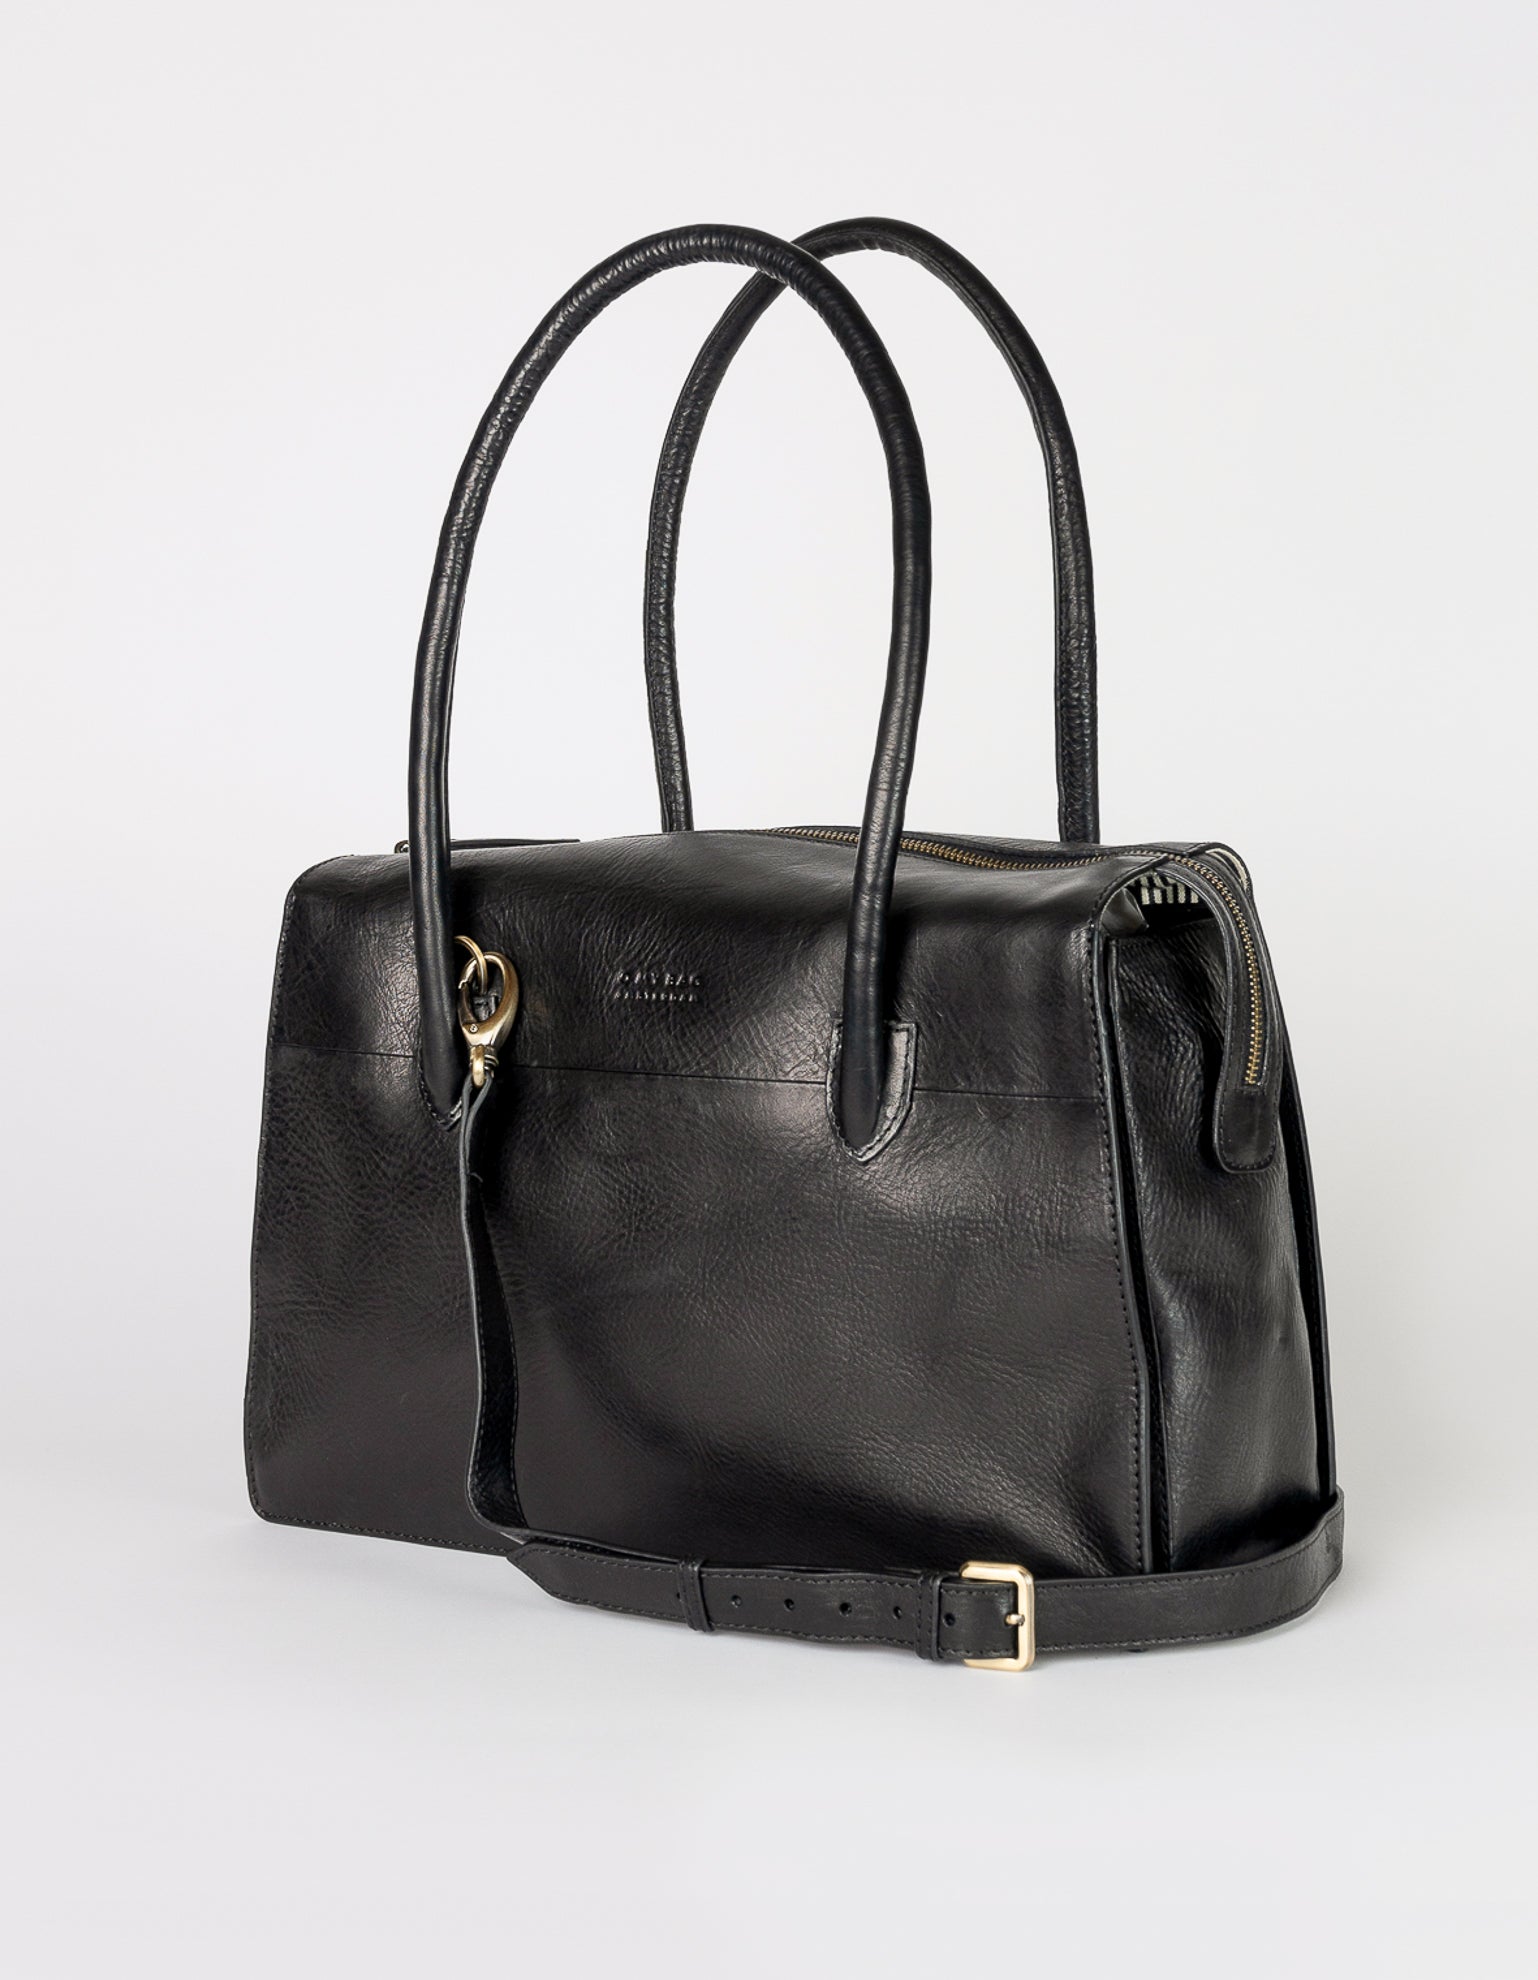 Kate Black Stromboli Leather Crossbody Shoulder Bag with Large Straps by O My Bag. Side Product Image with strap.